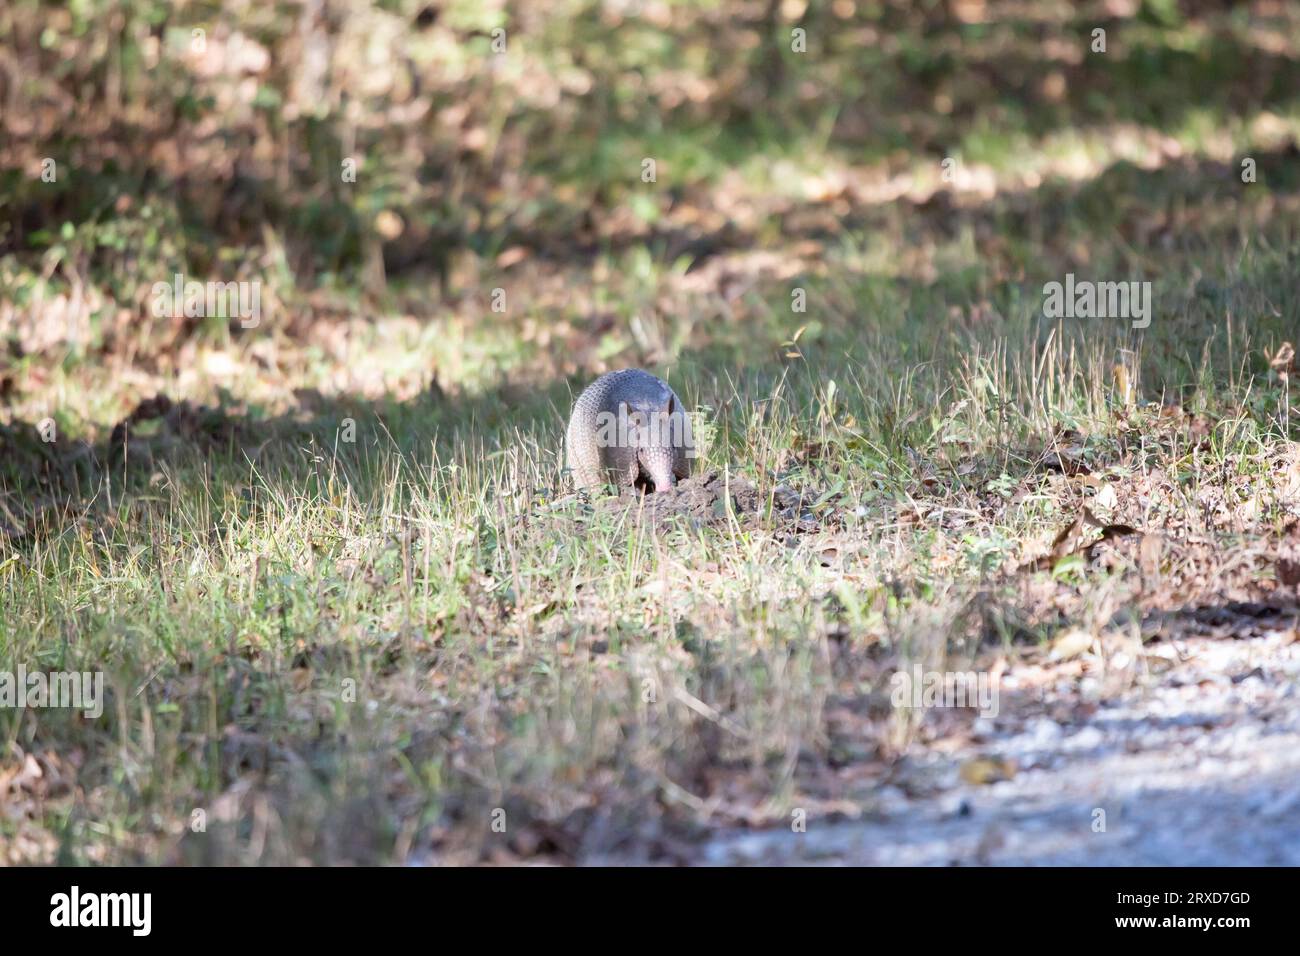 Nine-banded armadillo (Dasypus novemcinctus) slurping up ants from an ant hill Stock Photo